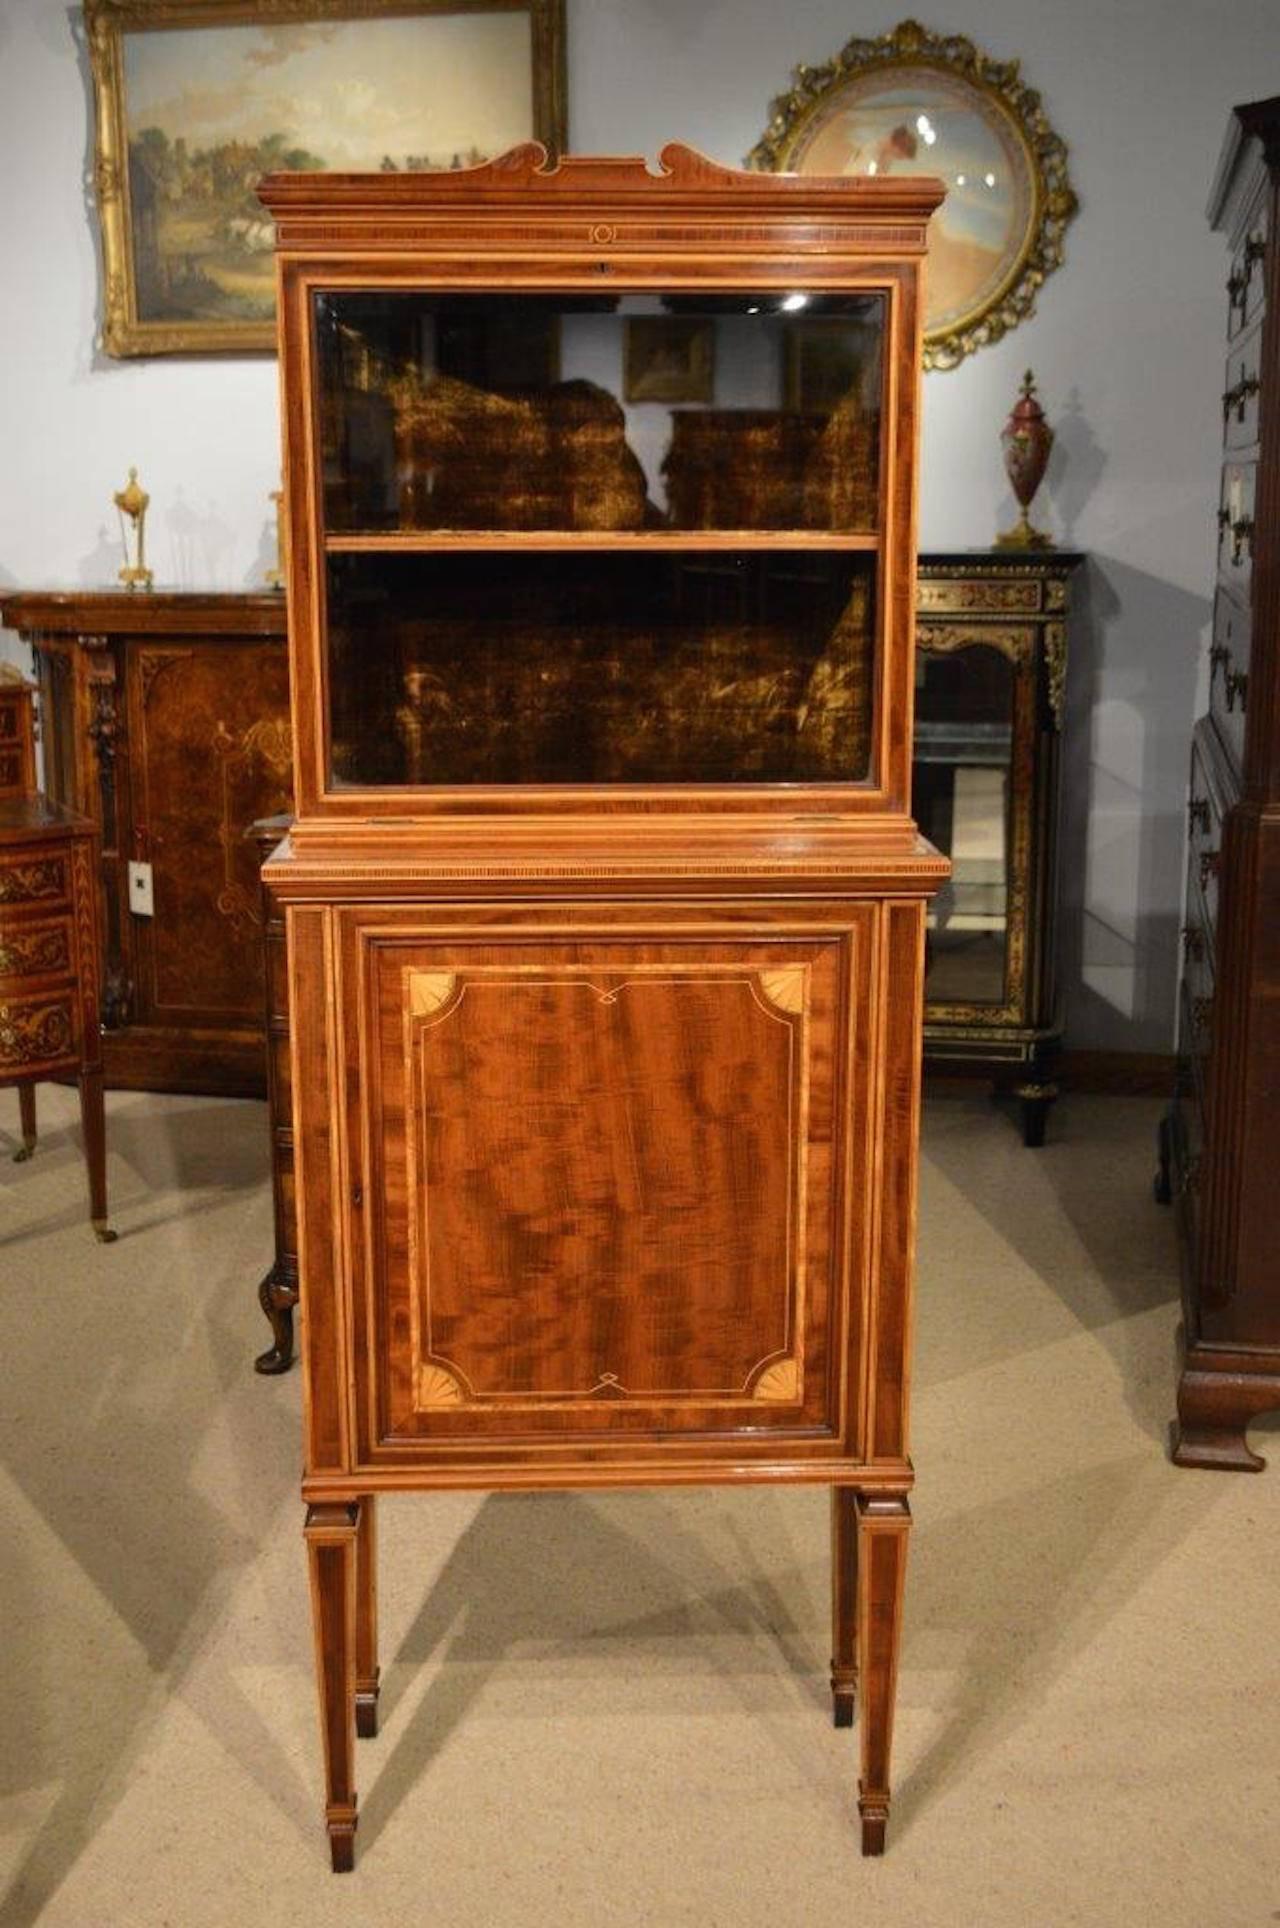 Early 20th Century Fine Quality Pair of Fiddleback Mahogany Edwardian Period Inlaid Cabinets